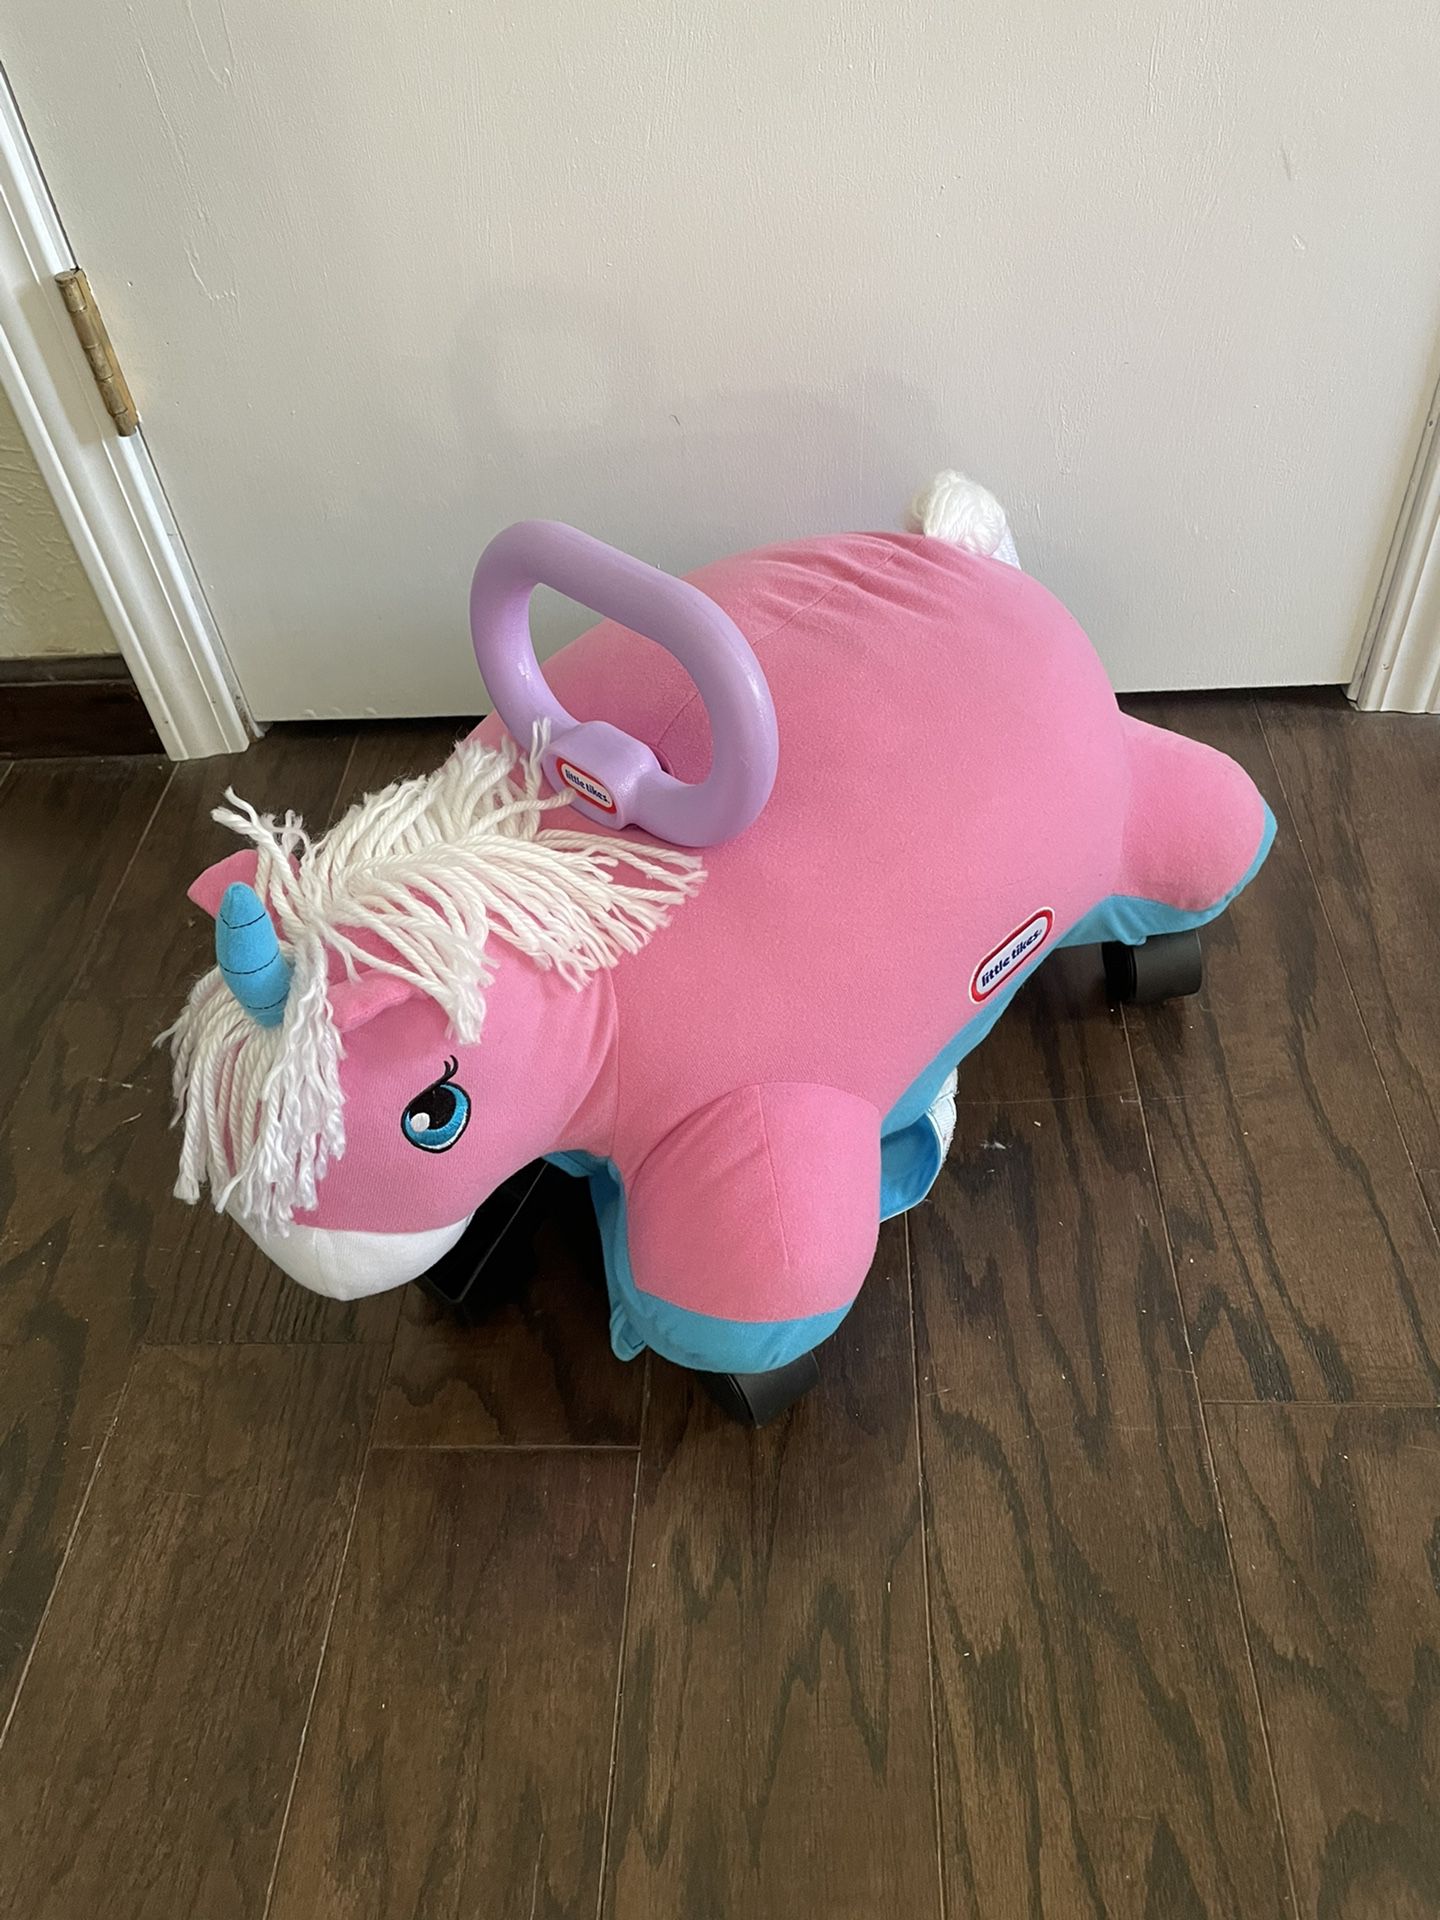 Child’s Riding Toy Gently Used